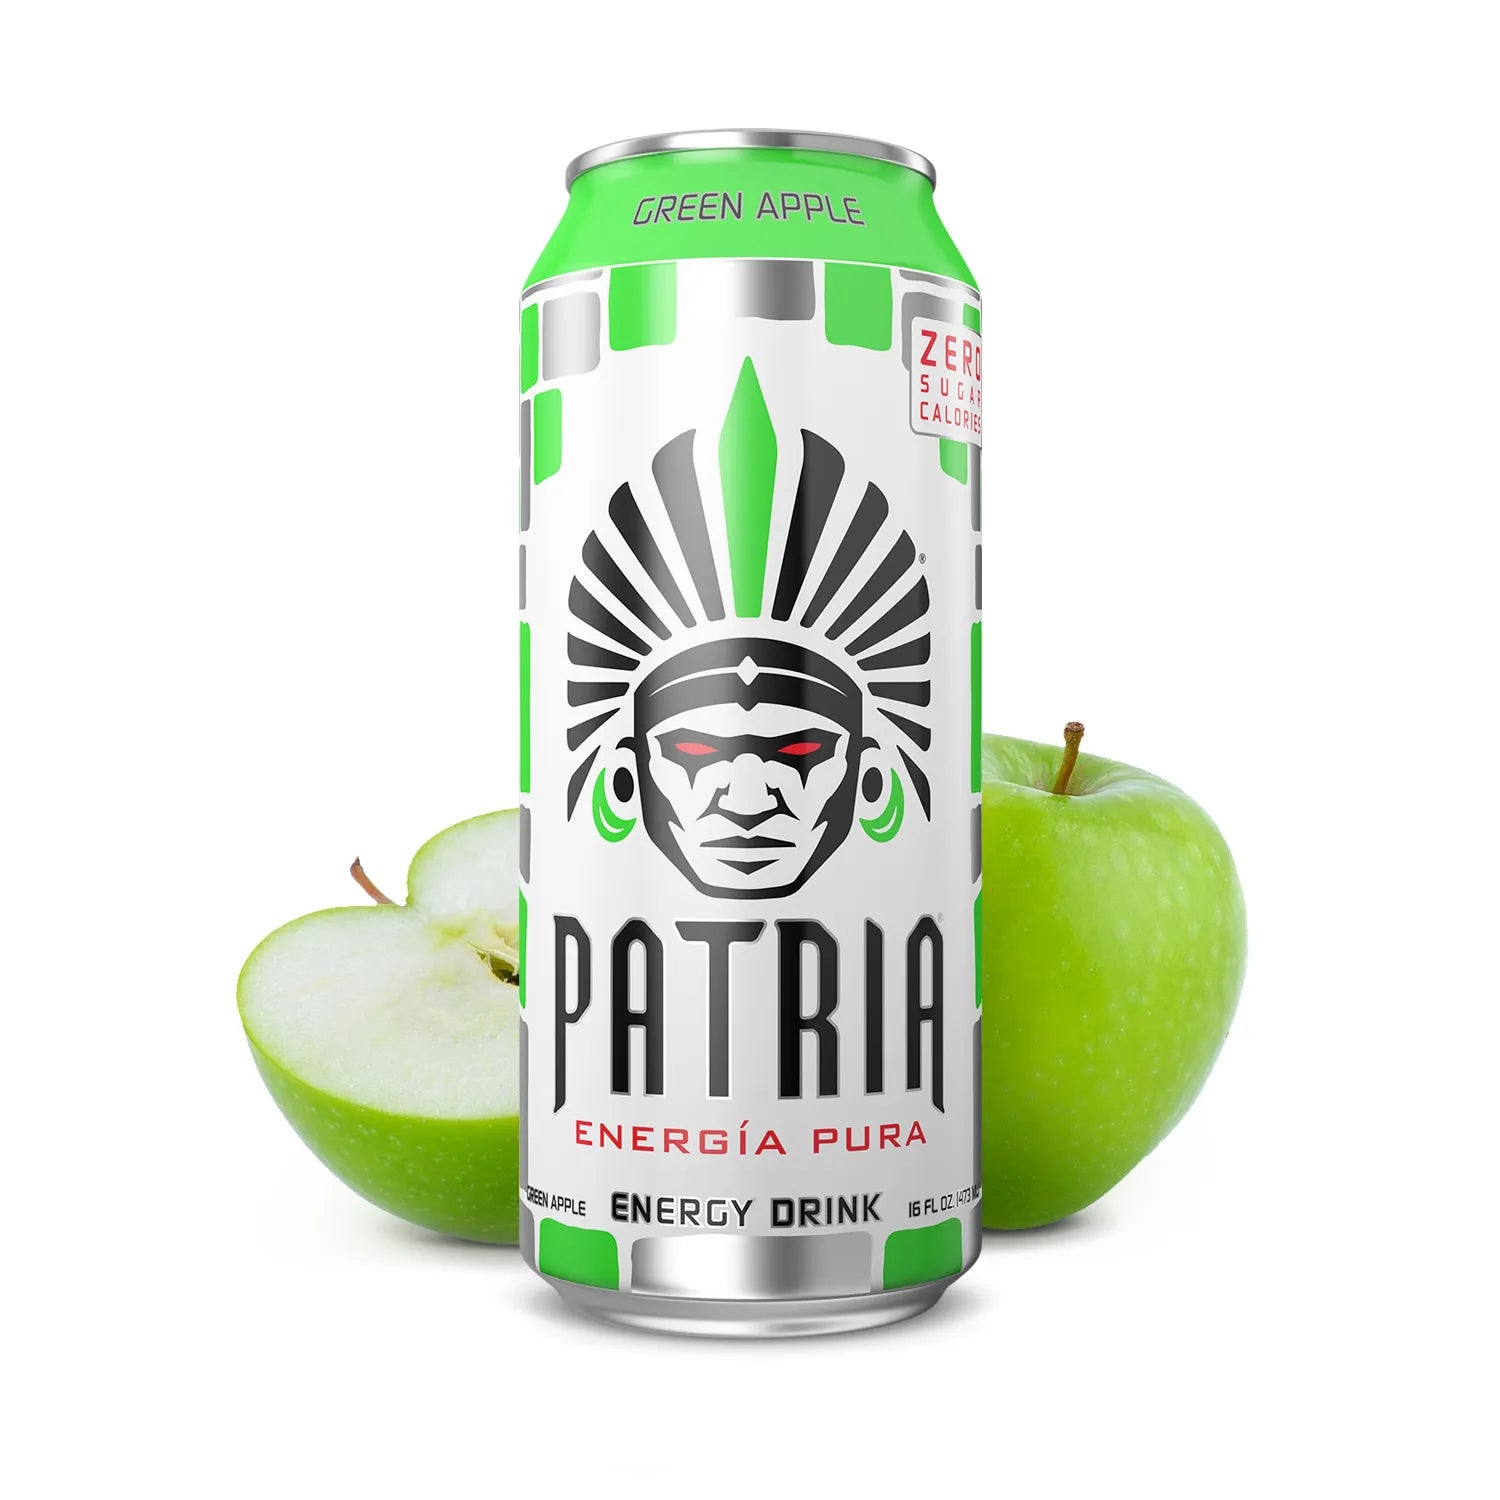 Patria Energy Drink - Green Apple - 16 oz Can (12 Pack Case)